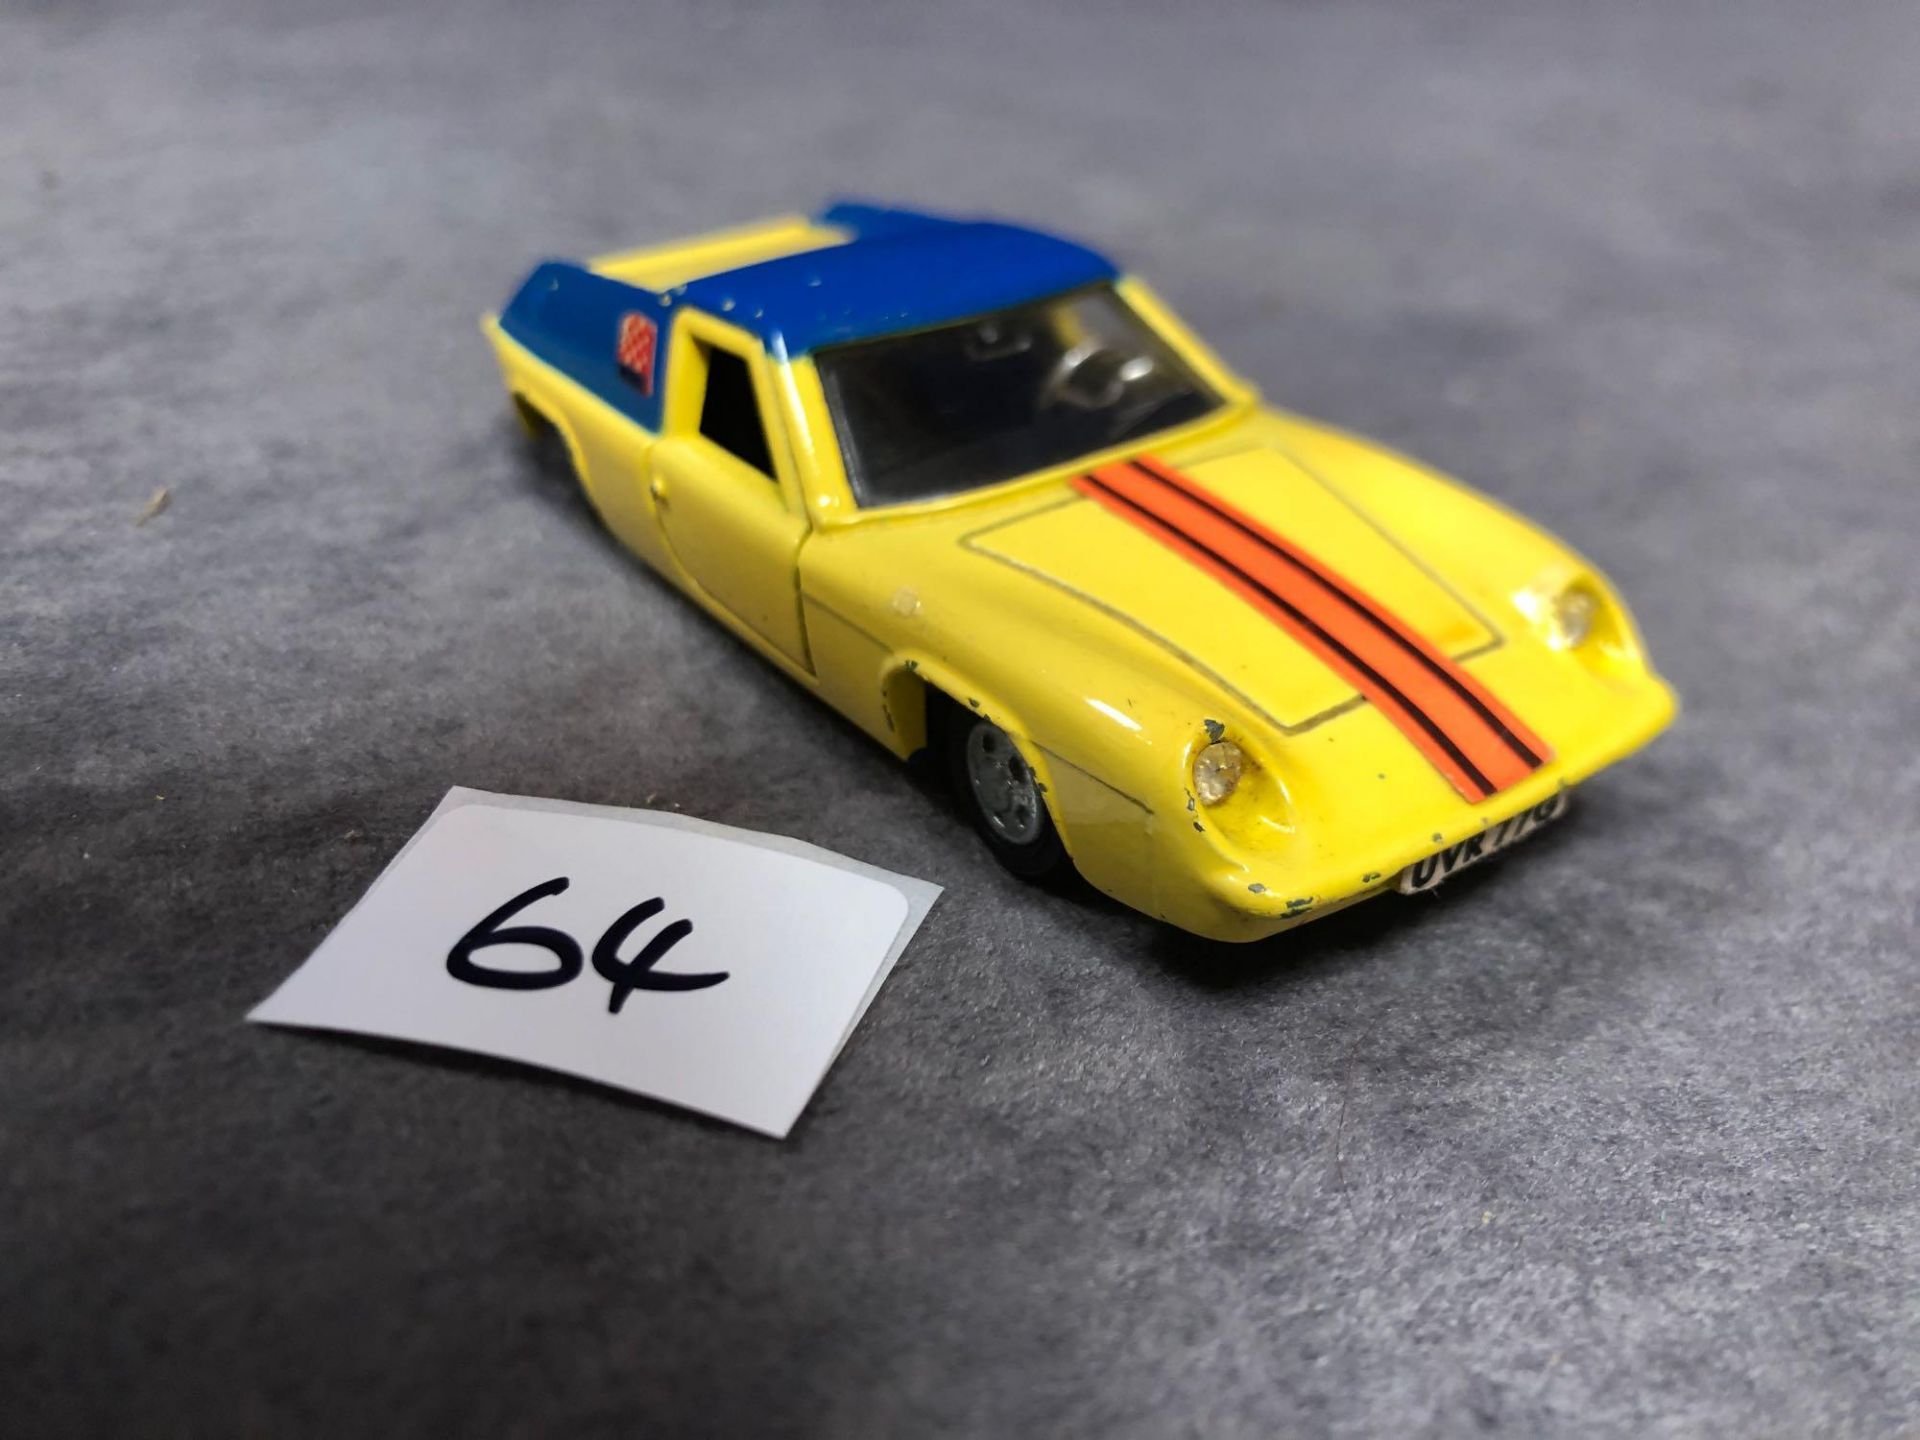 Dinky #218 Lotus Europa In Yellow Cast Wheels 1969-1970 Unboxed Excellent Some Chips On Raised